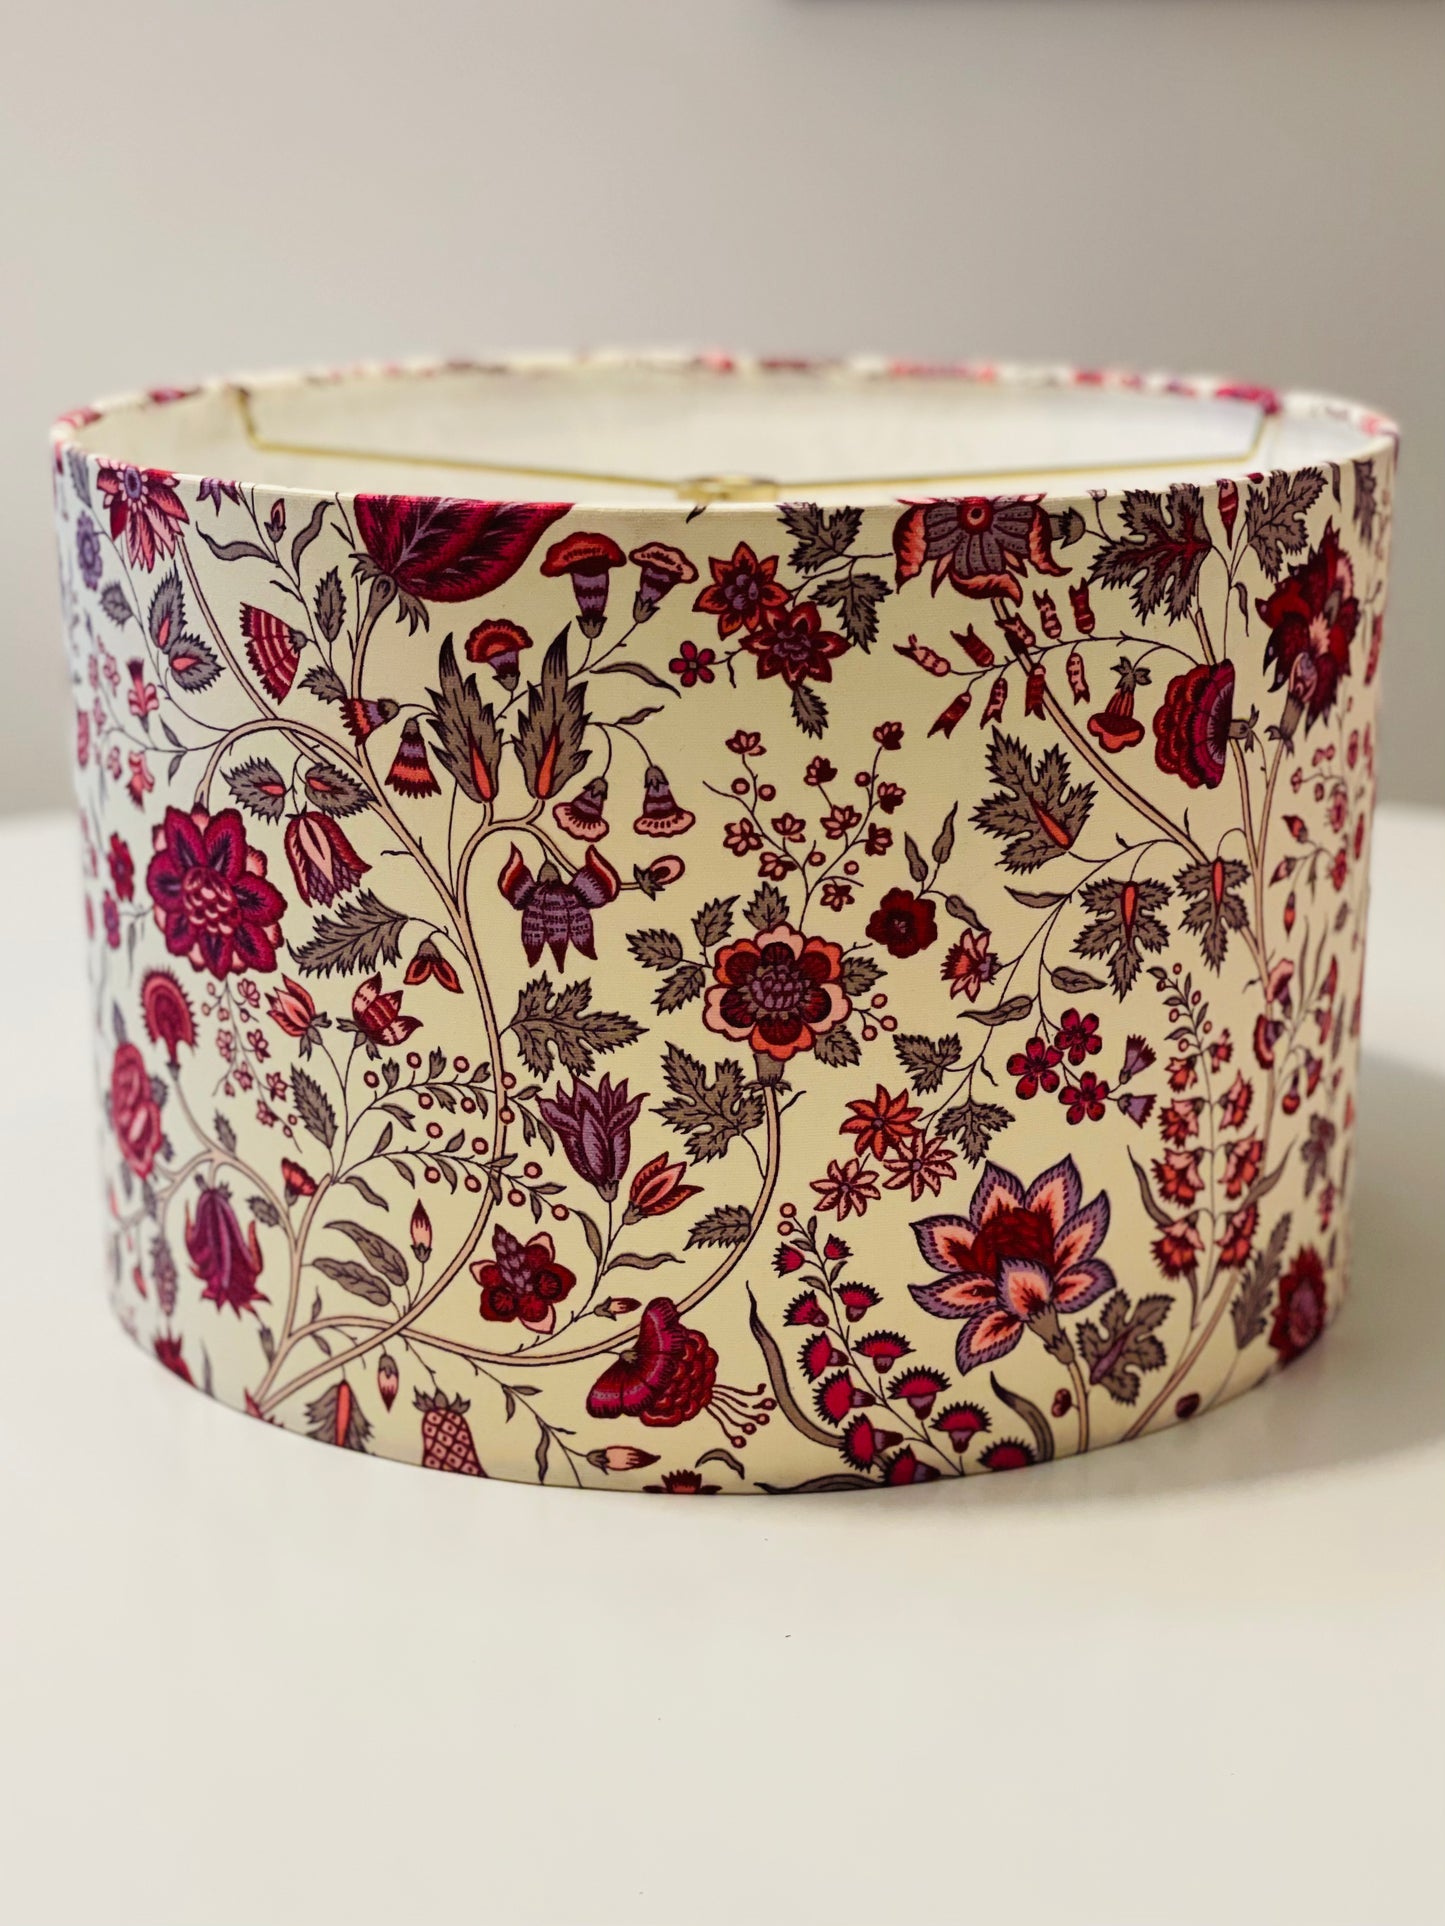 12 Inch Drum Shade. French Jacquard. "Les Indiennes" Shades of Rose on Ecru.